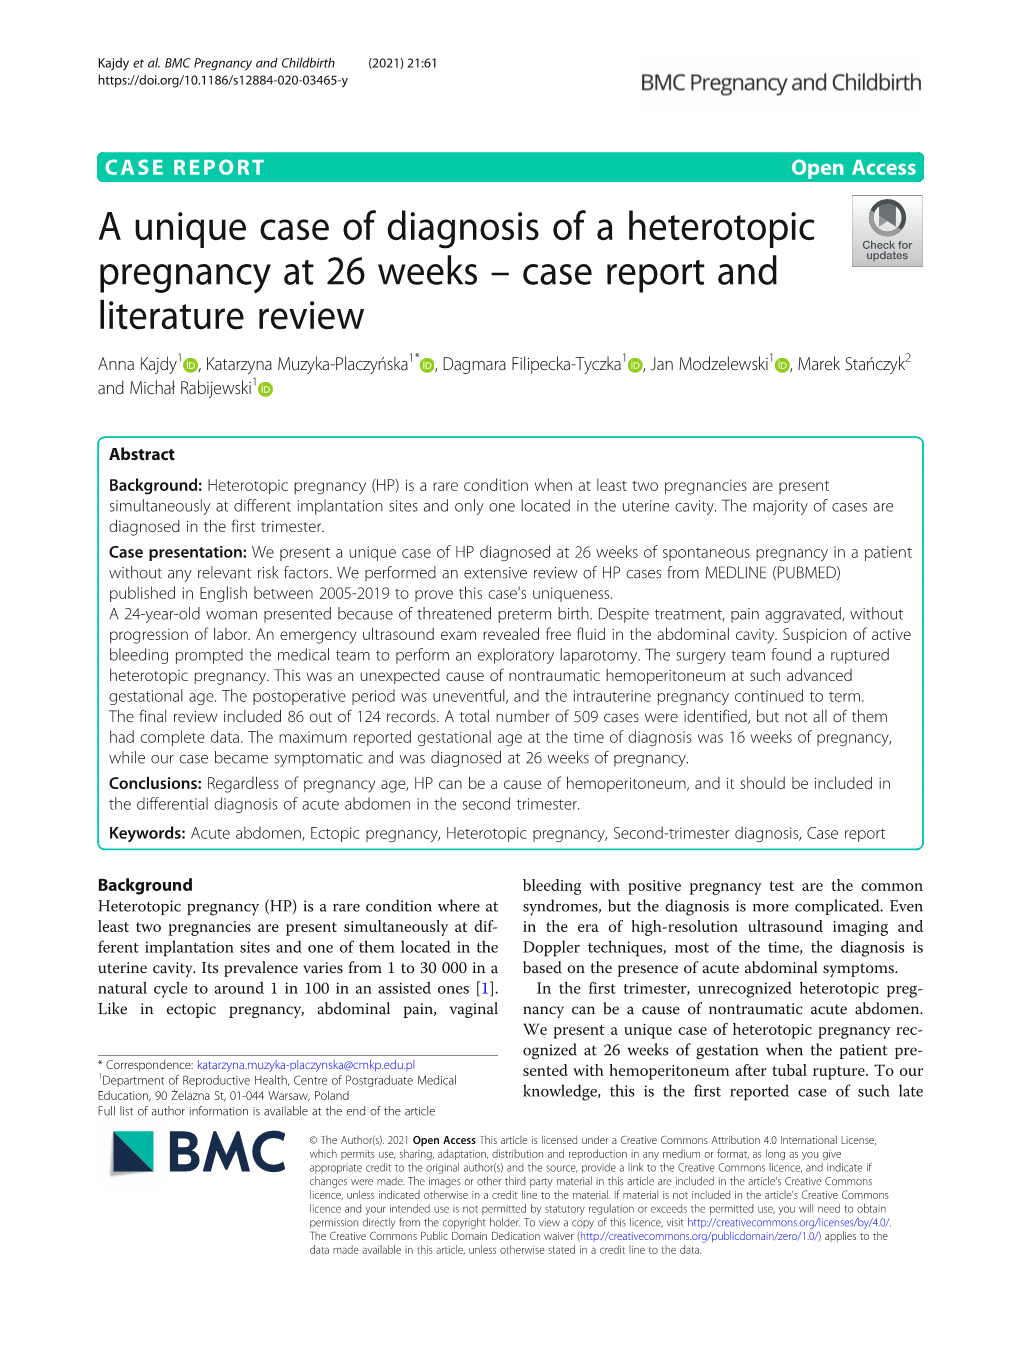 A Unique Case of Diagnosis of a Heterotopic Pregnancy at 26 Weeks